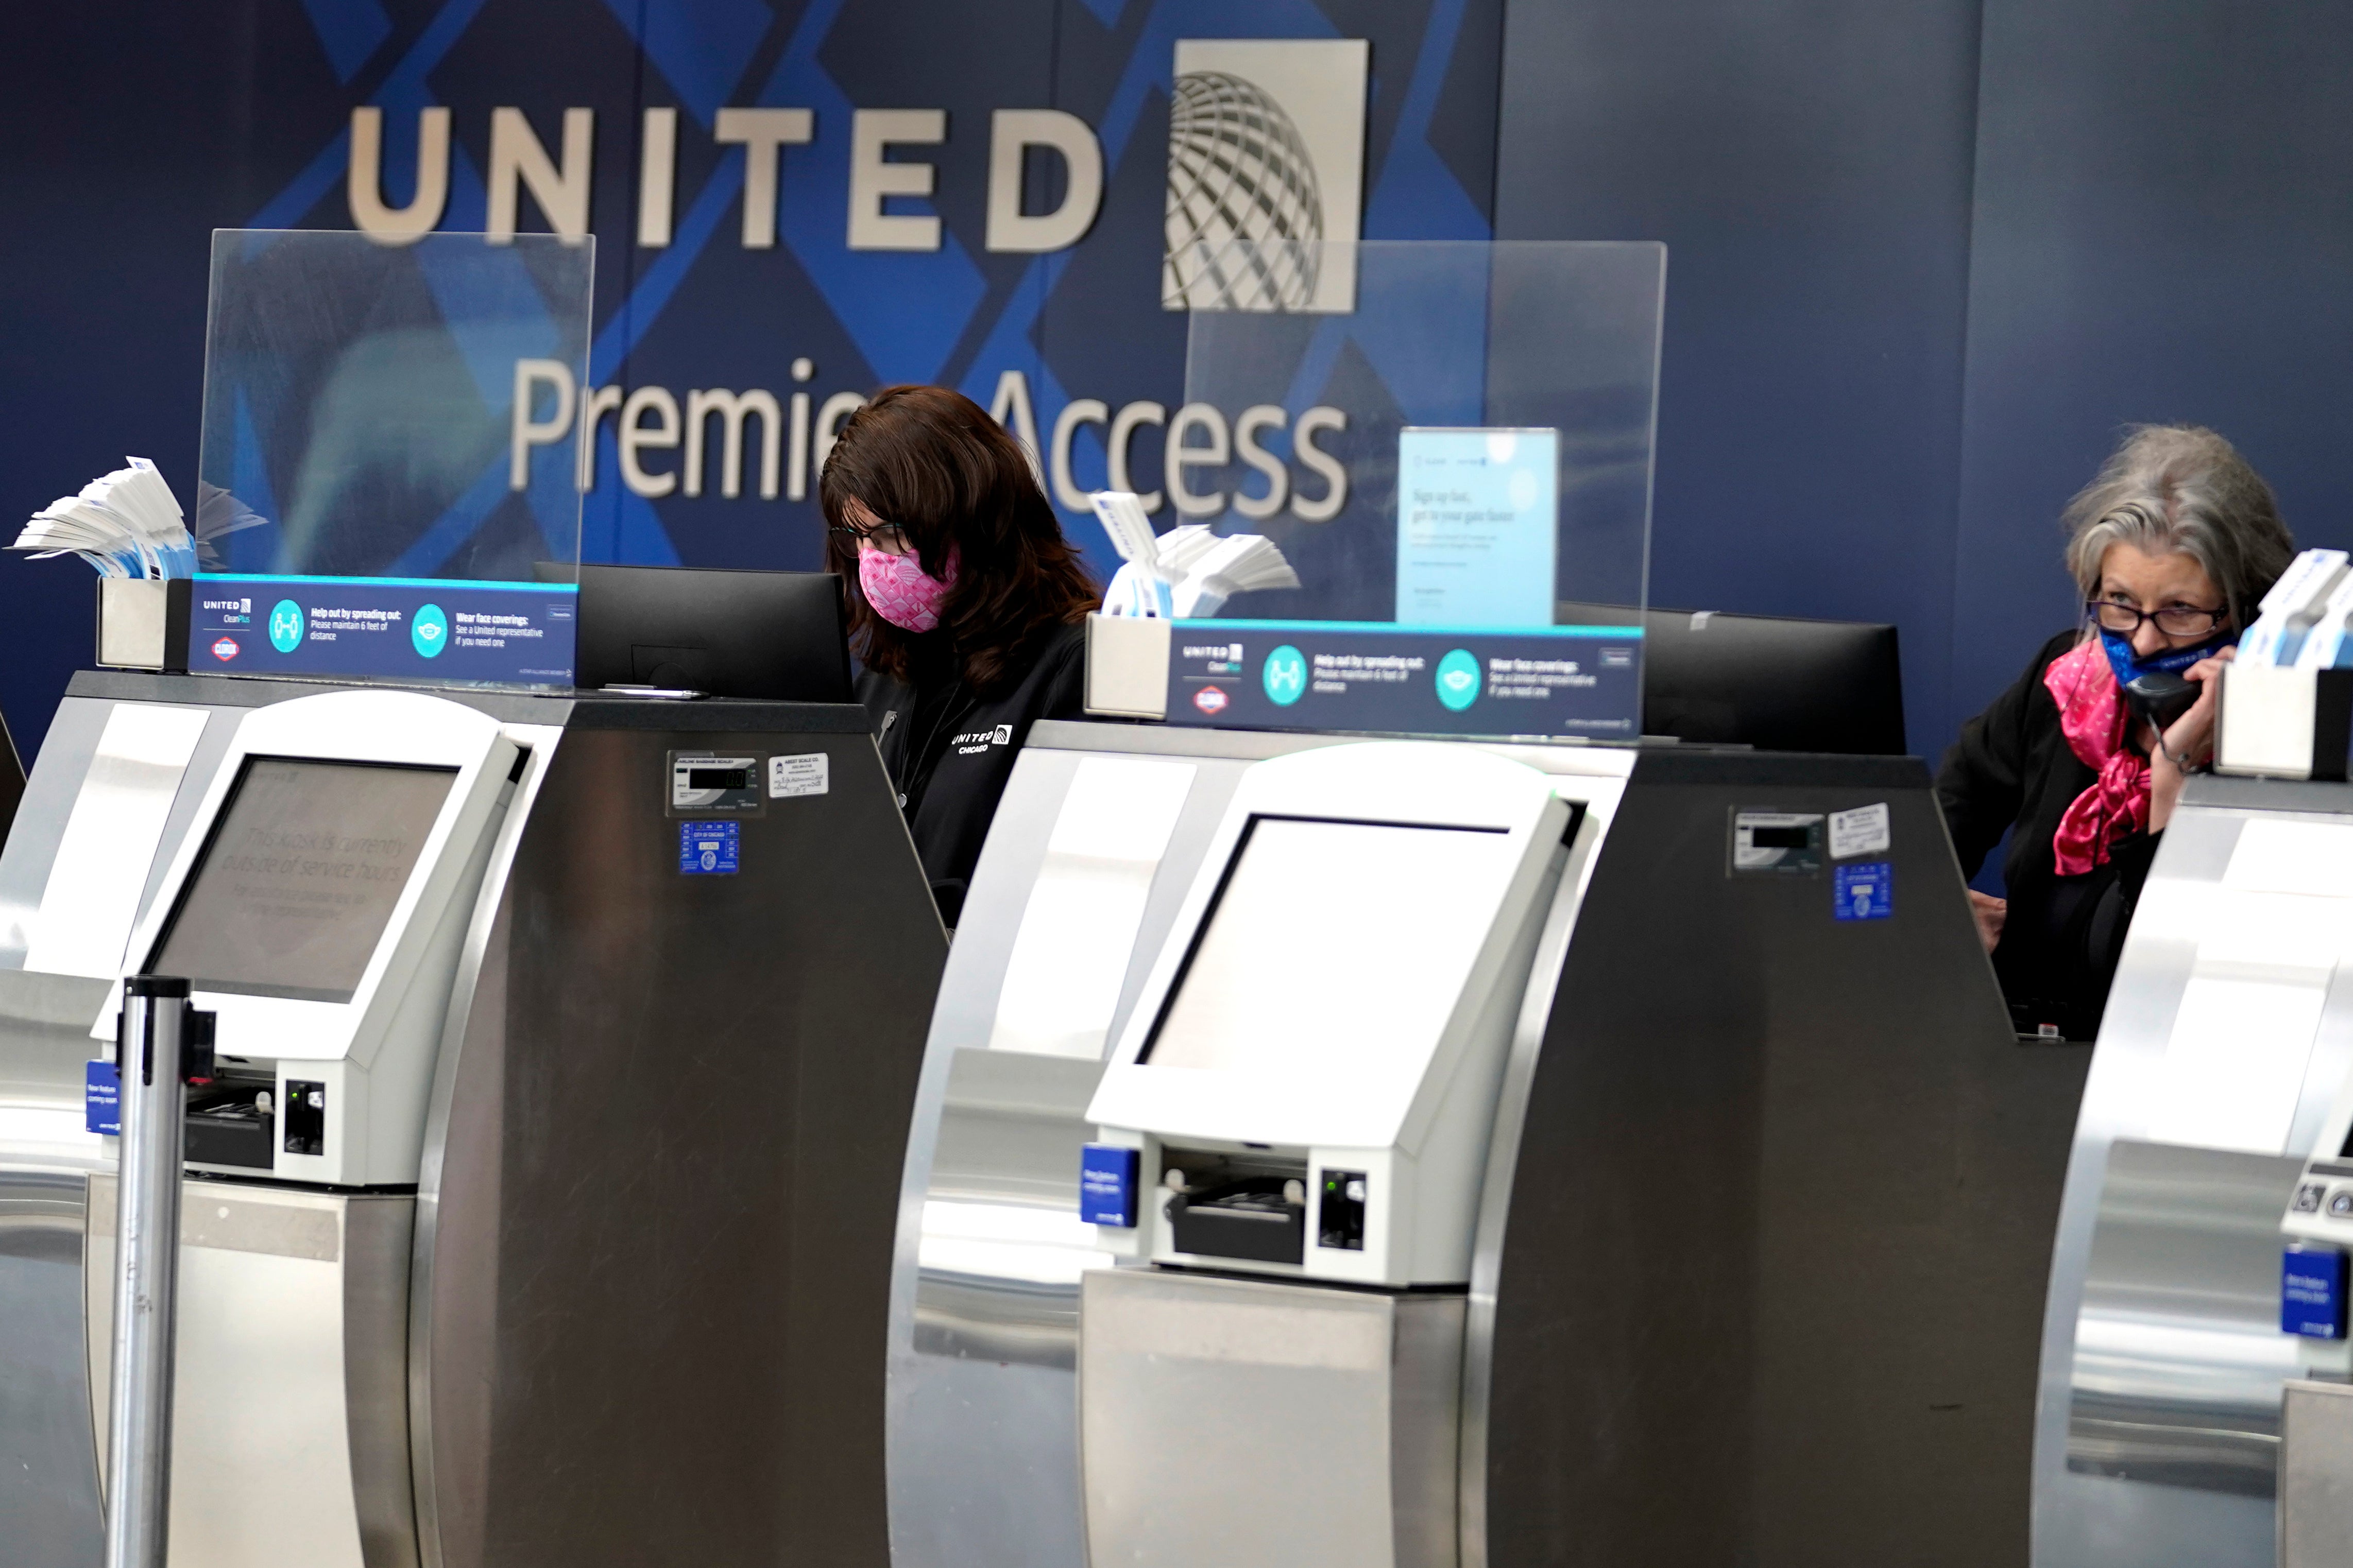 United Airlines employees work at ticket counters in Terminal 1 at O'Hare International Airport in Chicago.